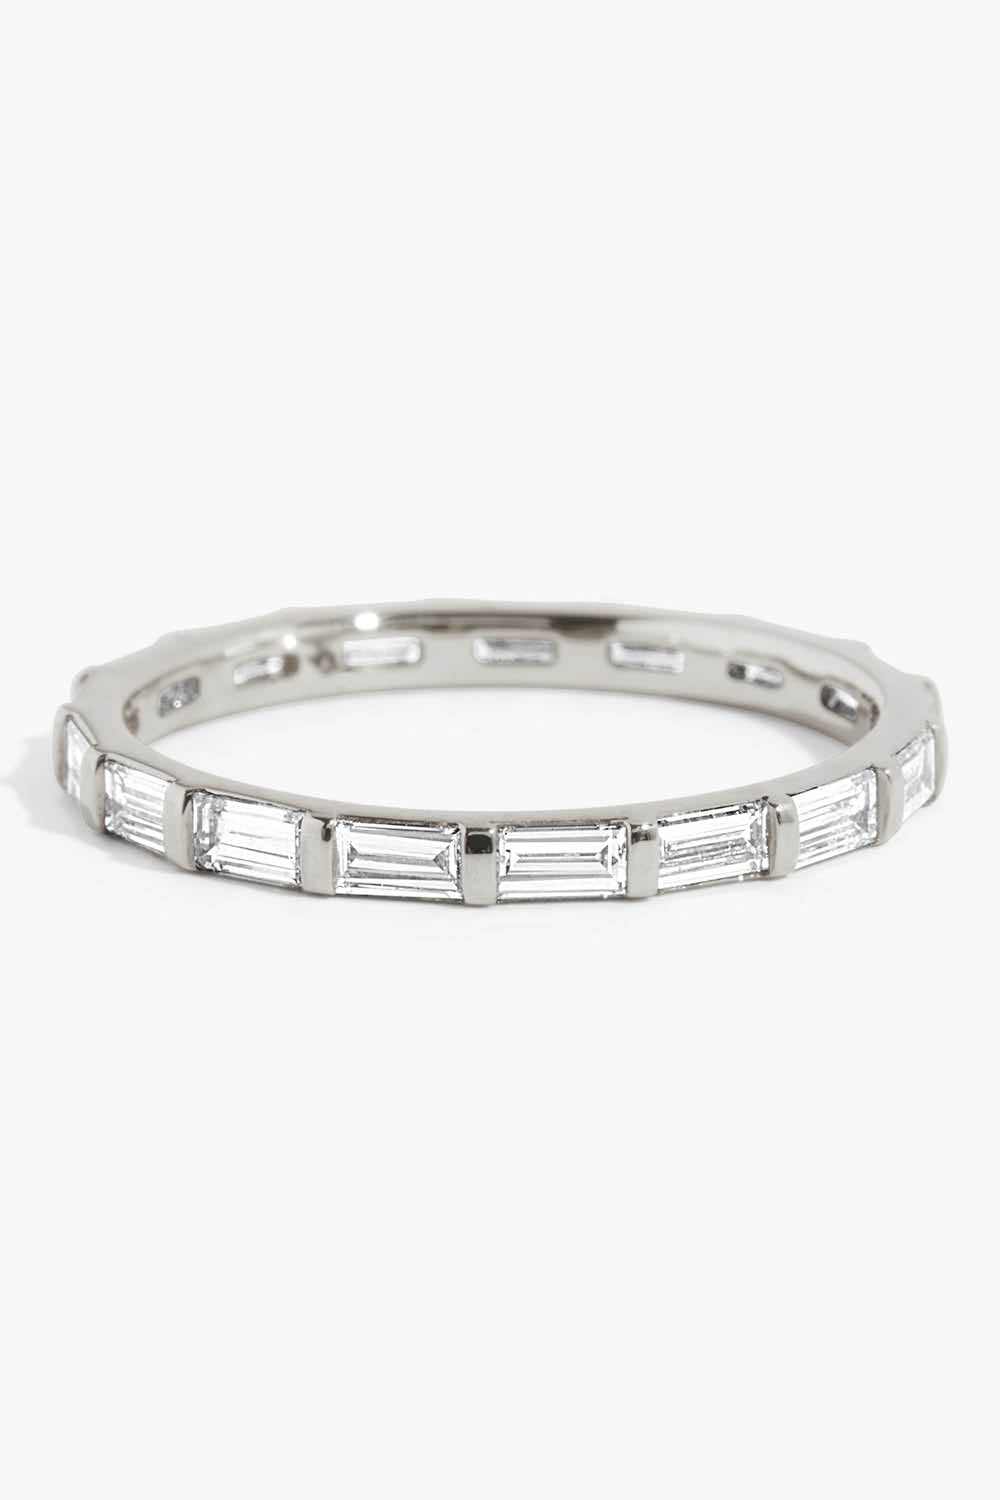 VRAI Baguette Infinity Band in White Gold